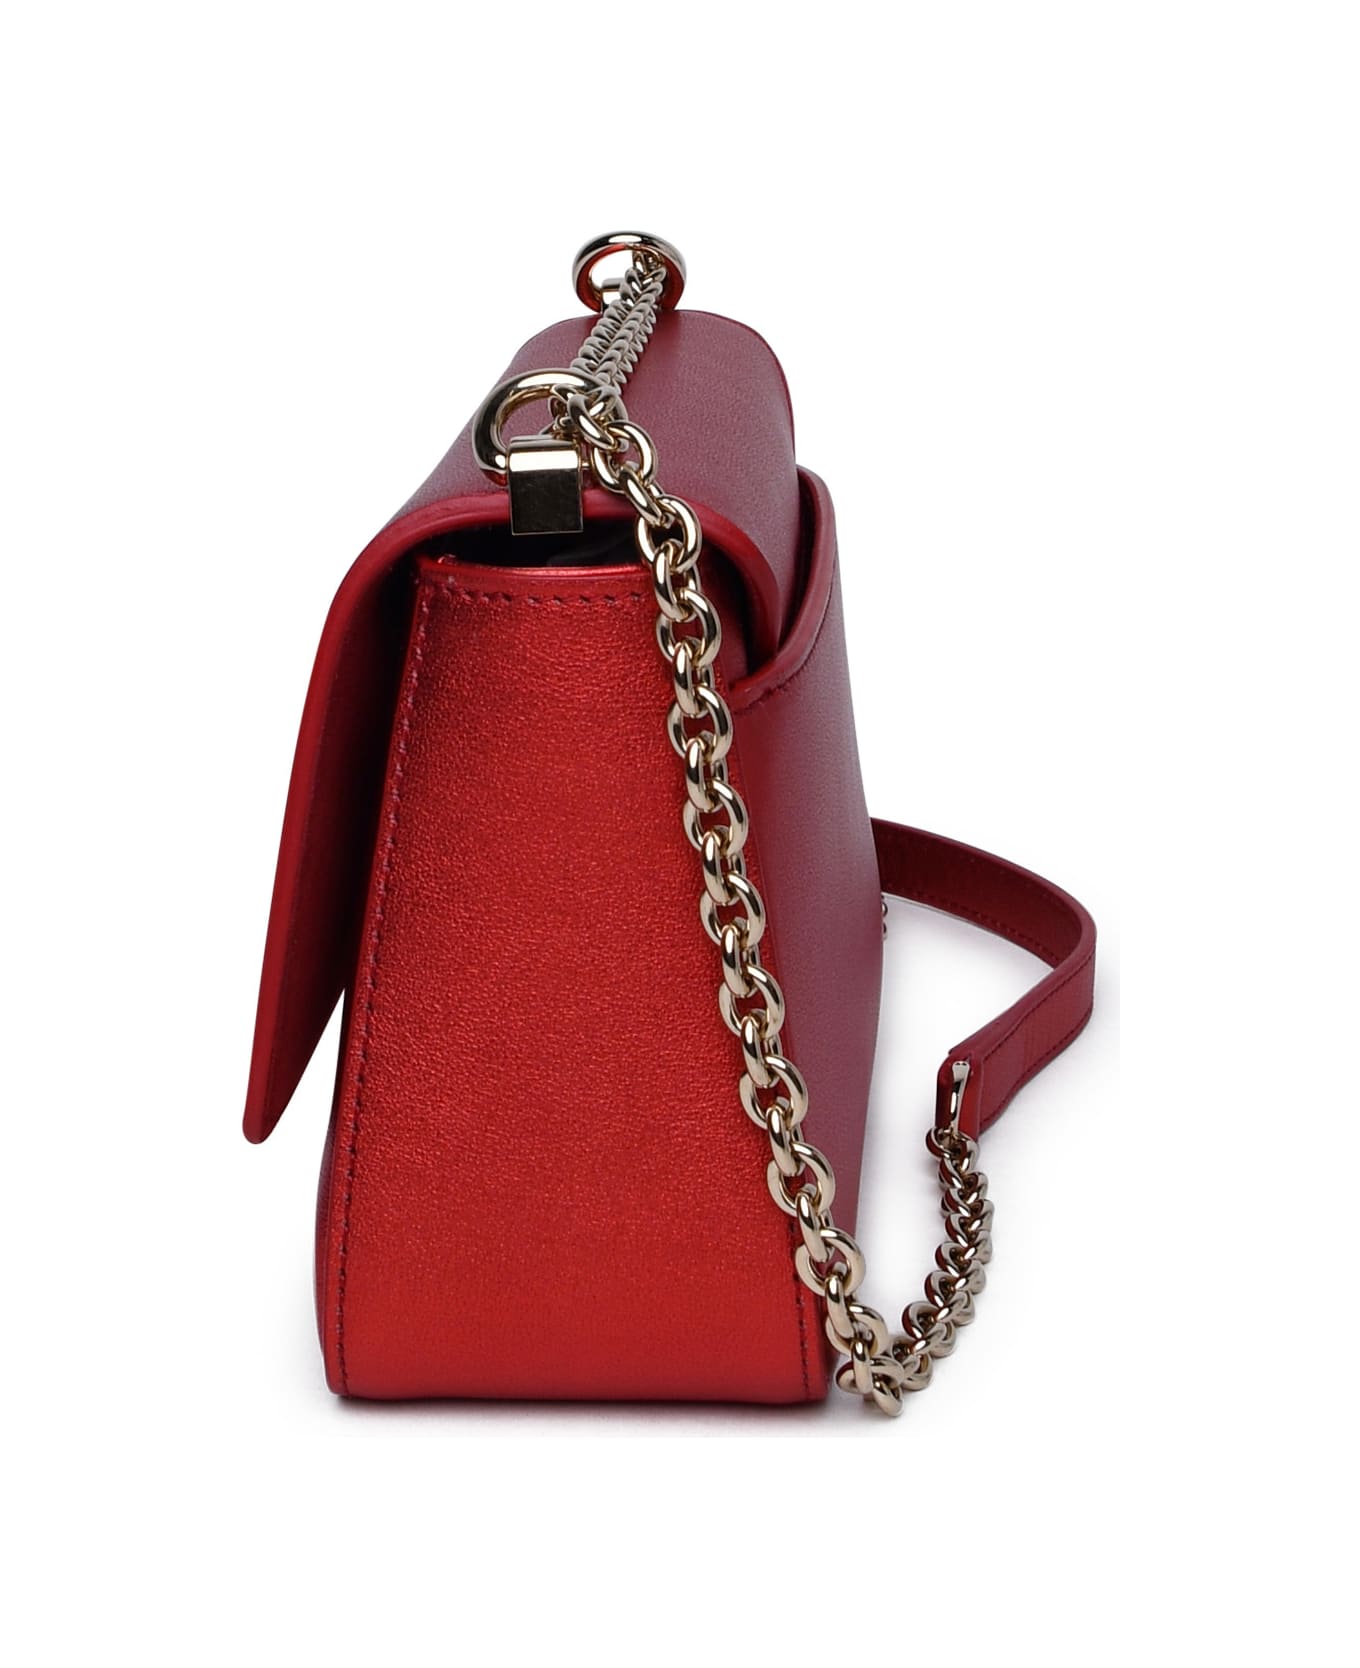 Furla Red Leather Bag - Red ショルダーバッグ